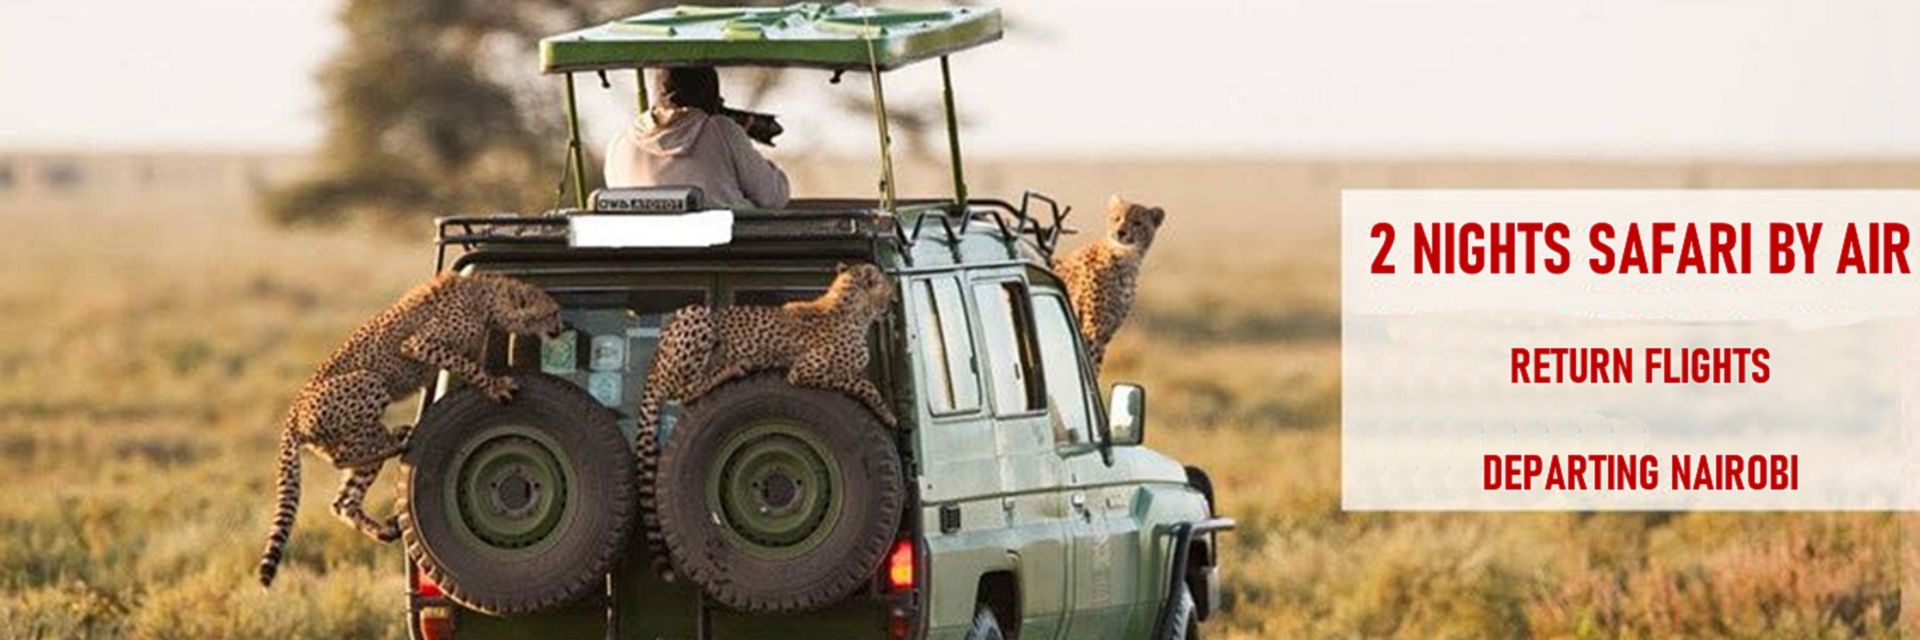 welcome to luxury lodgings for your safari adventure